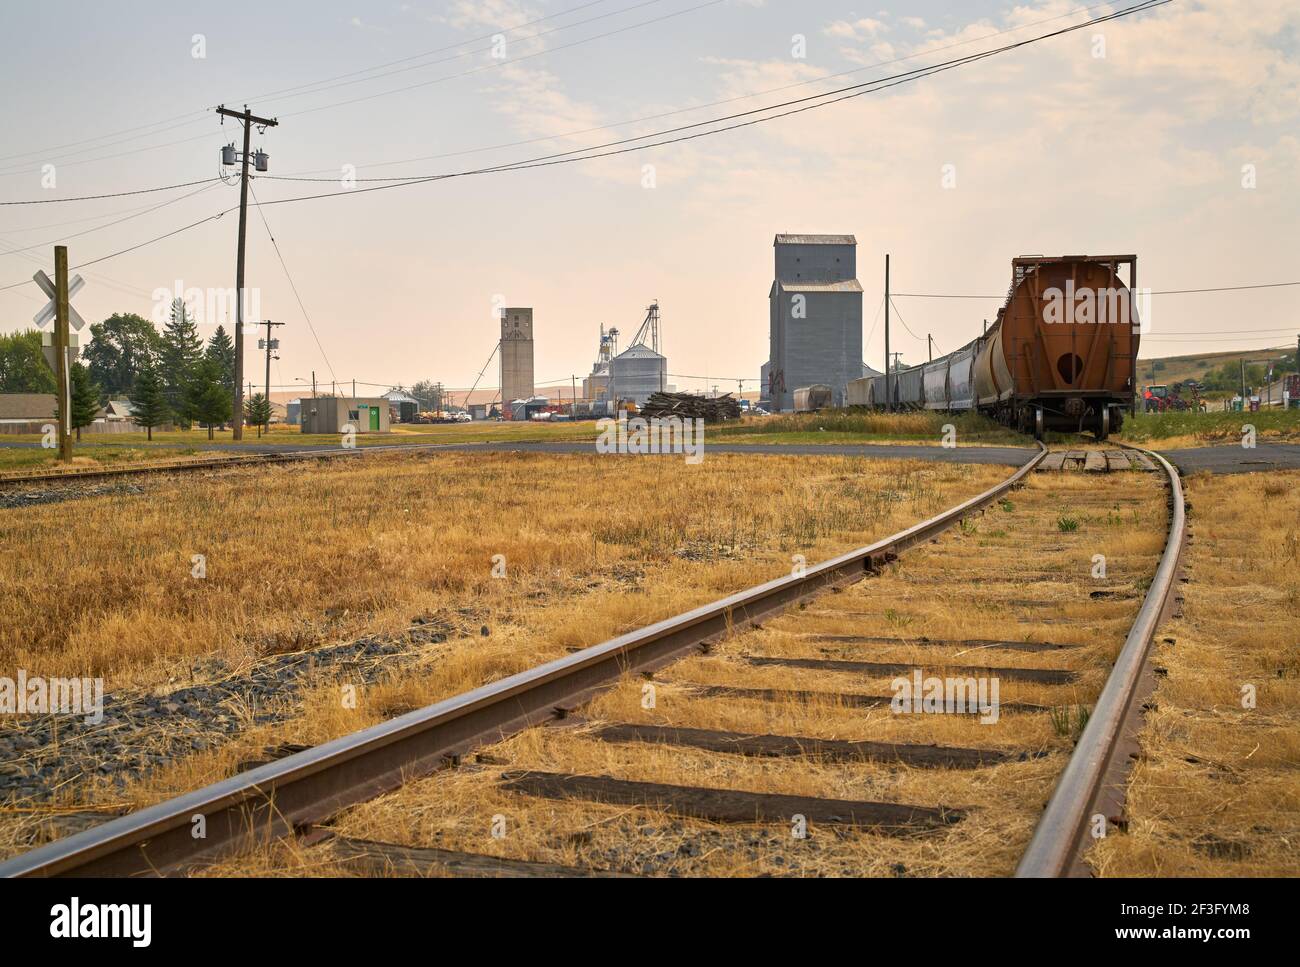 Oakesdale Rail Line and Grain Elevator. Railcars and a grain elevator in Oakesdale, Washington State, USA. Stock Photo